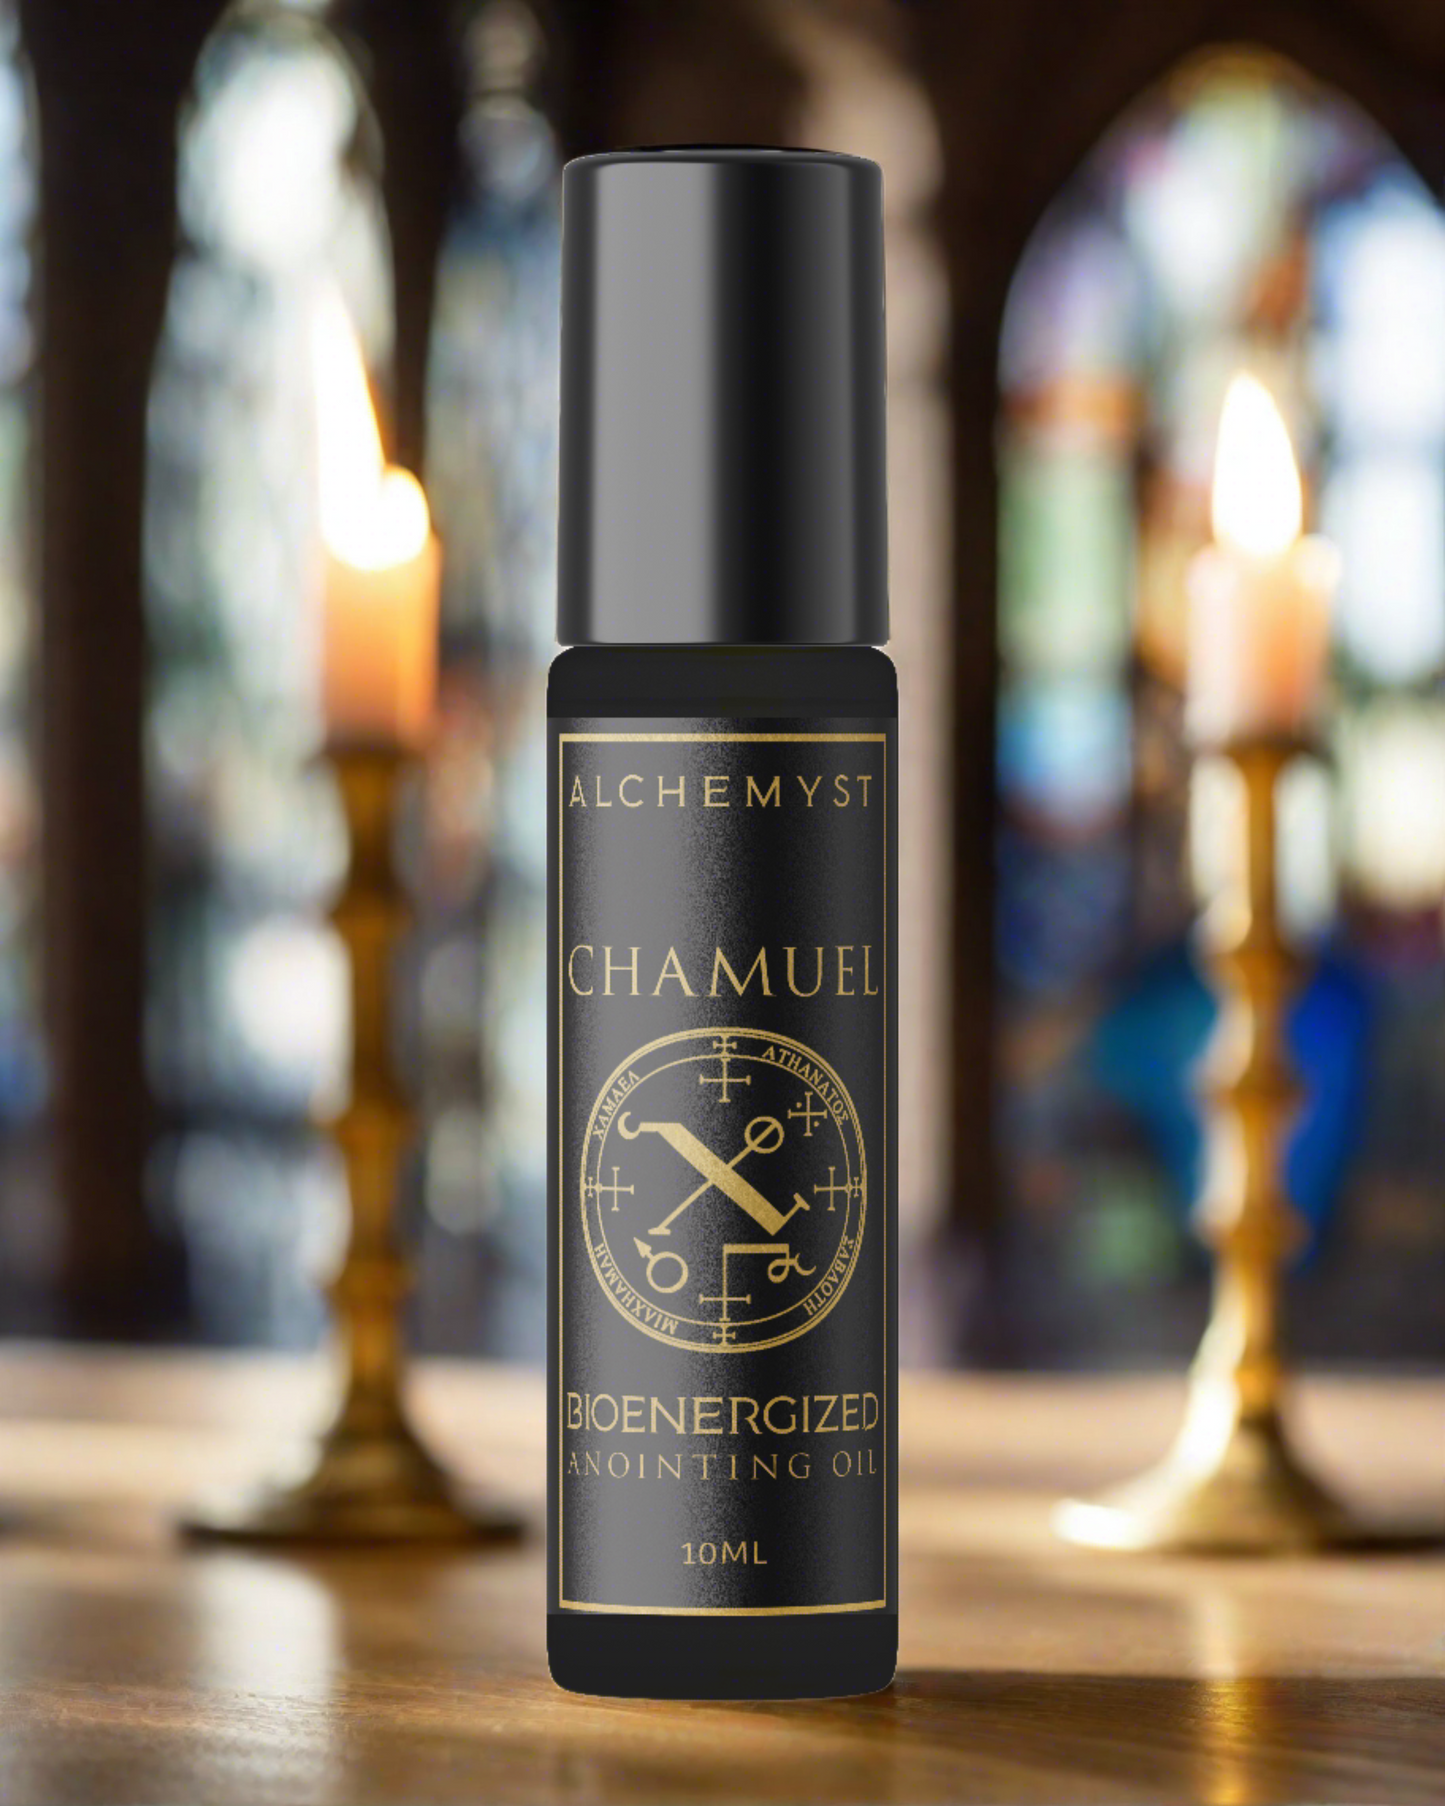 CHAMUEL - Archangel Anointing Oil - Bioenergized Natural Perfume Alchemyst Co